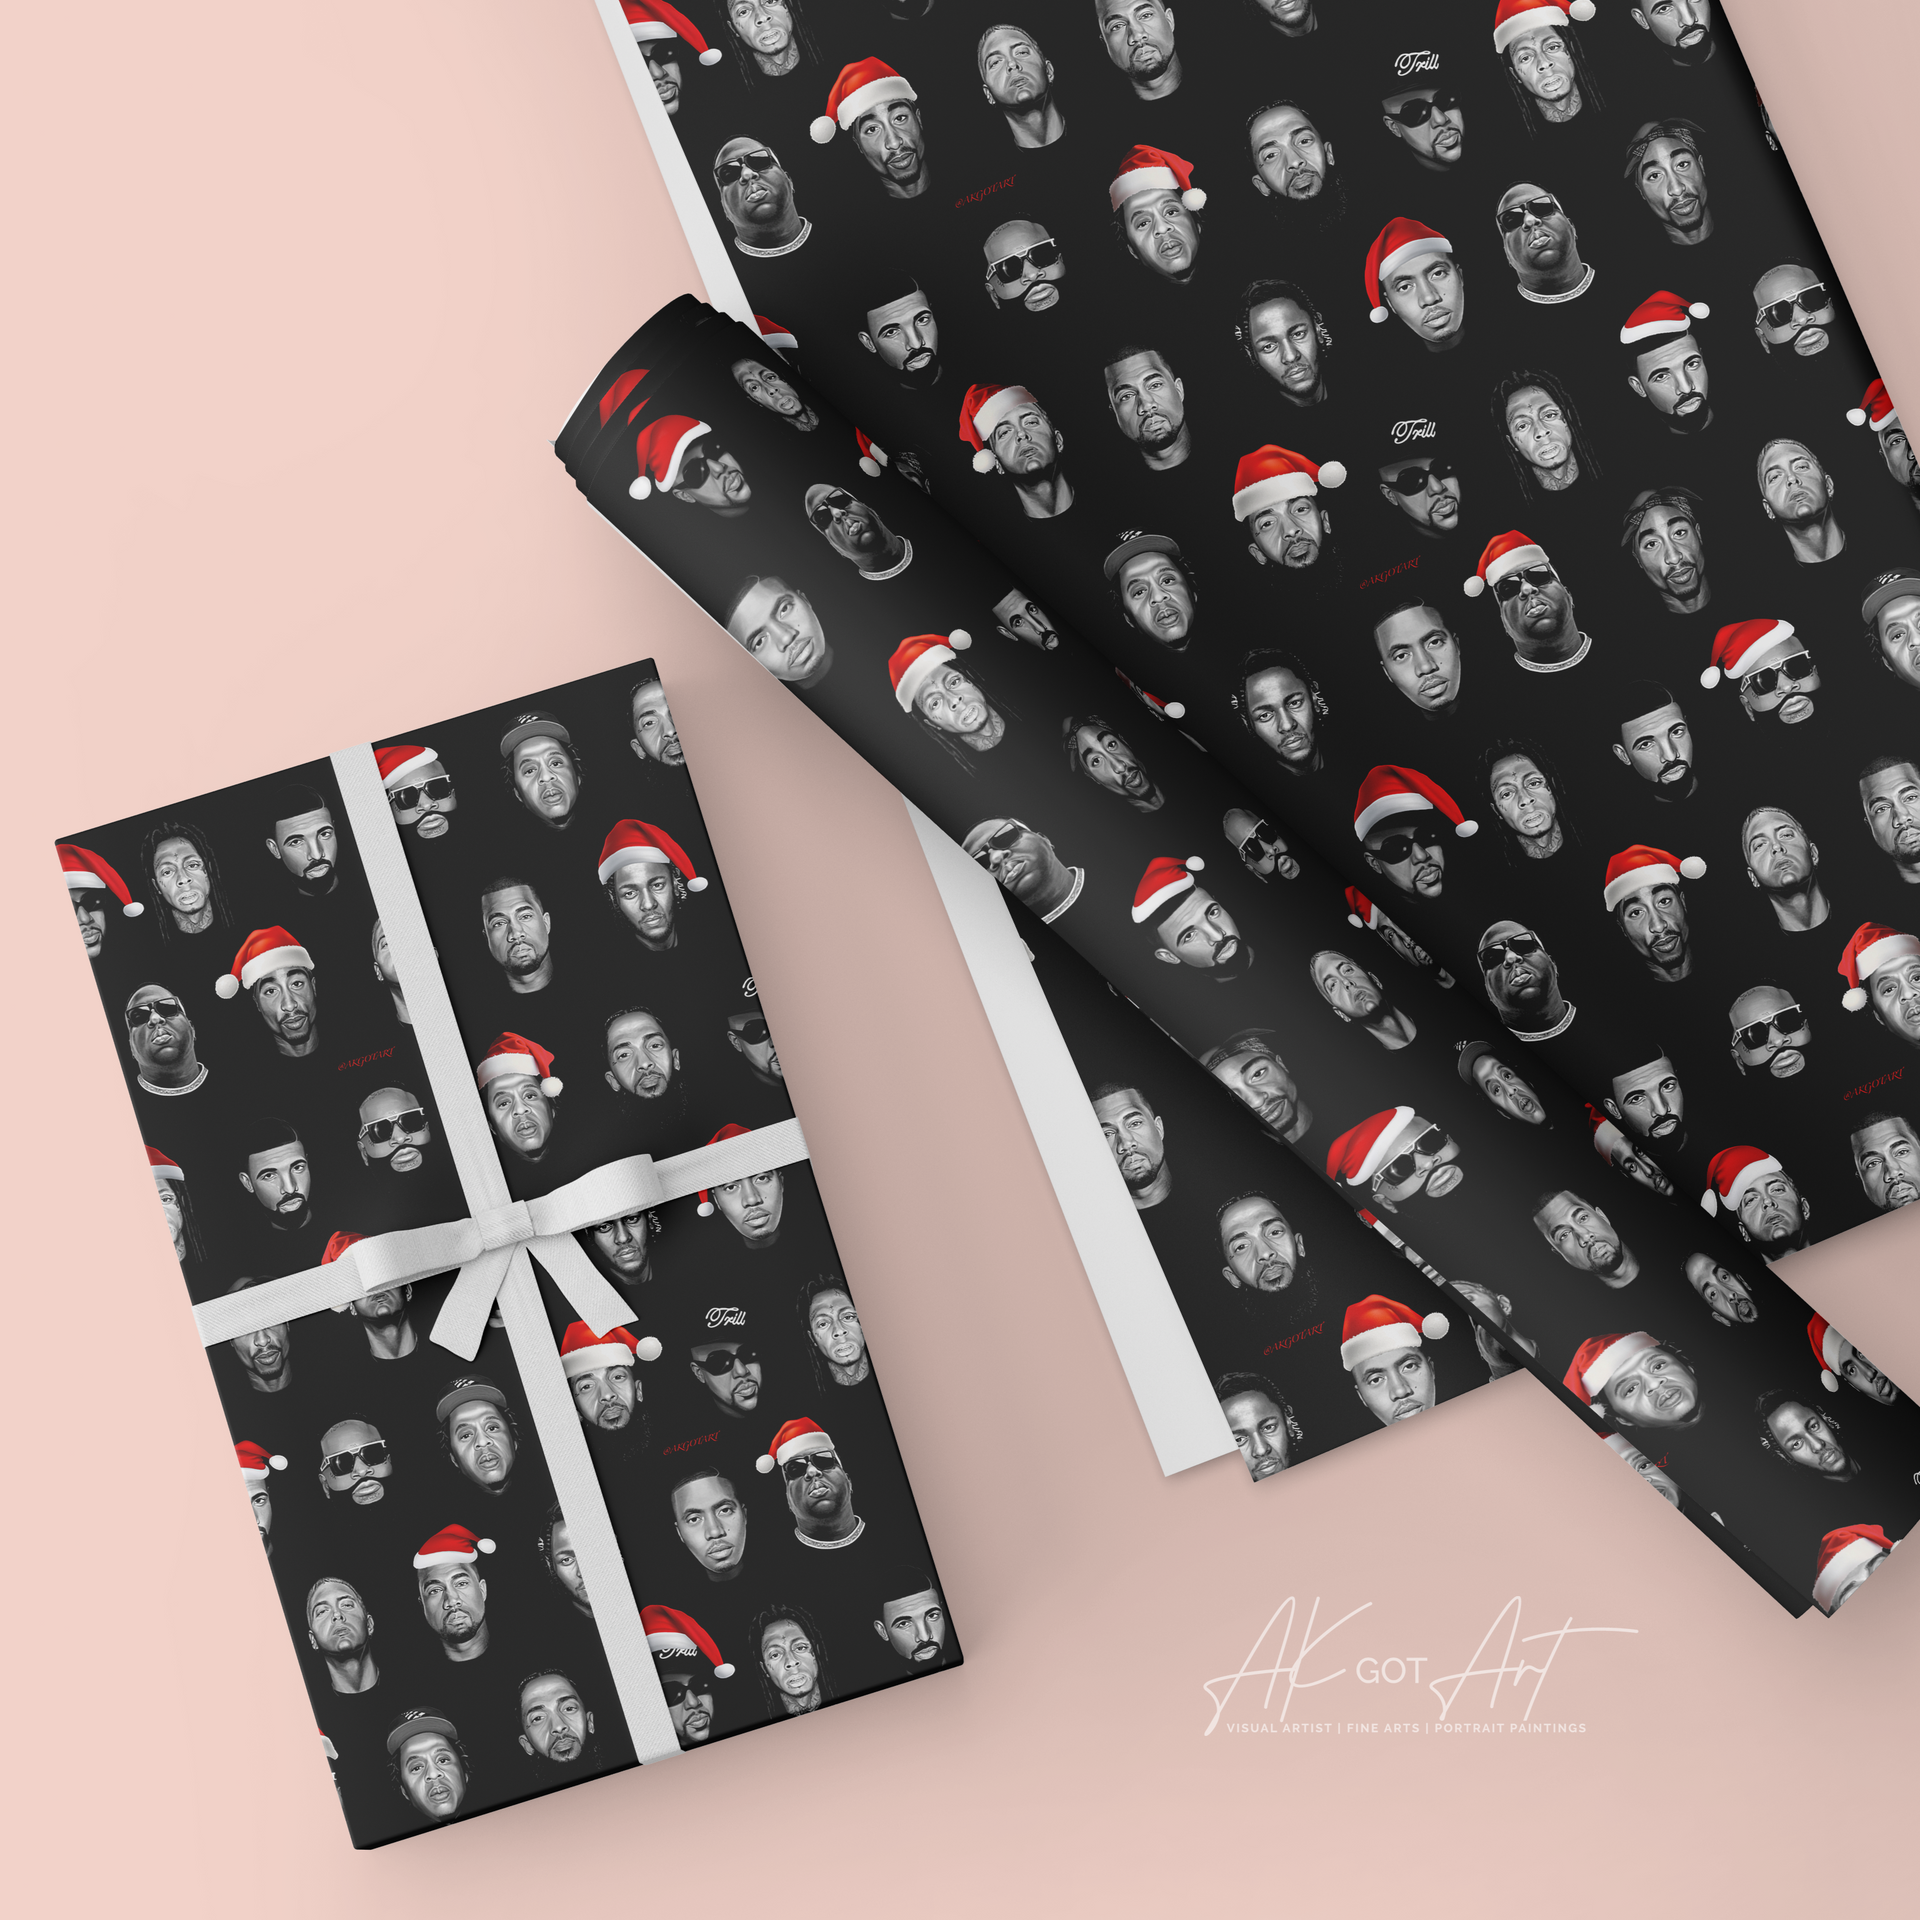 Black and White Christmas Wrapping Paper